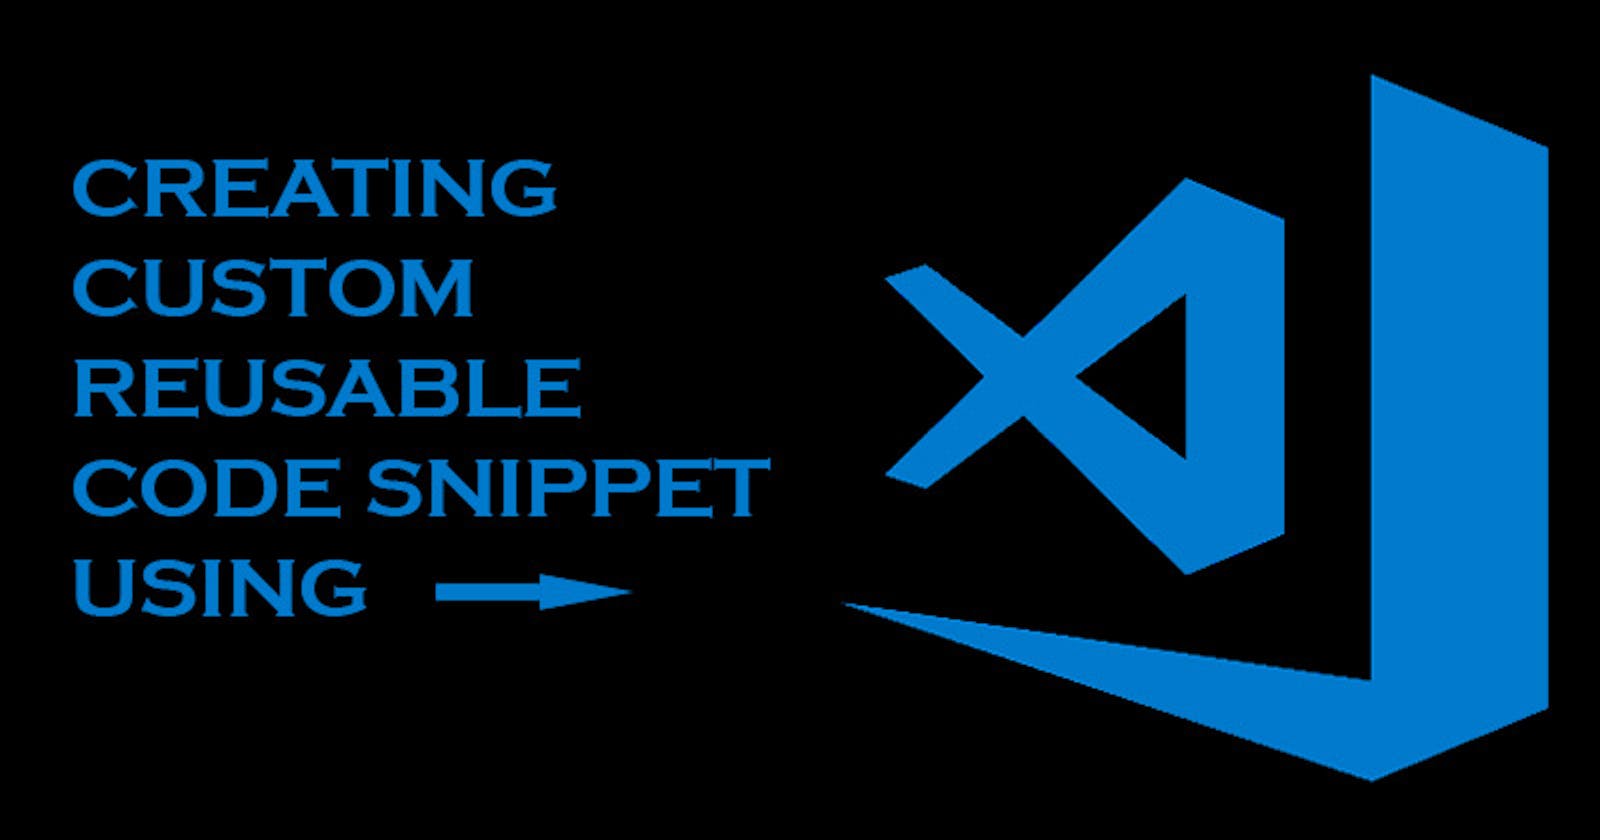 How to create a custom reusable code snippet in 6 minutes  (using VSCode)